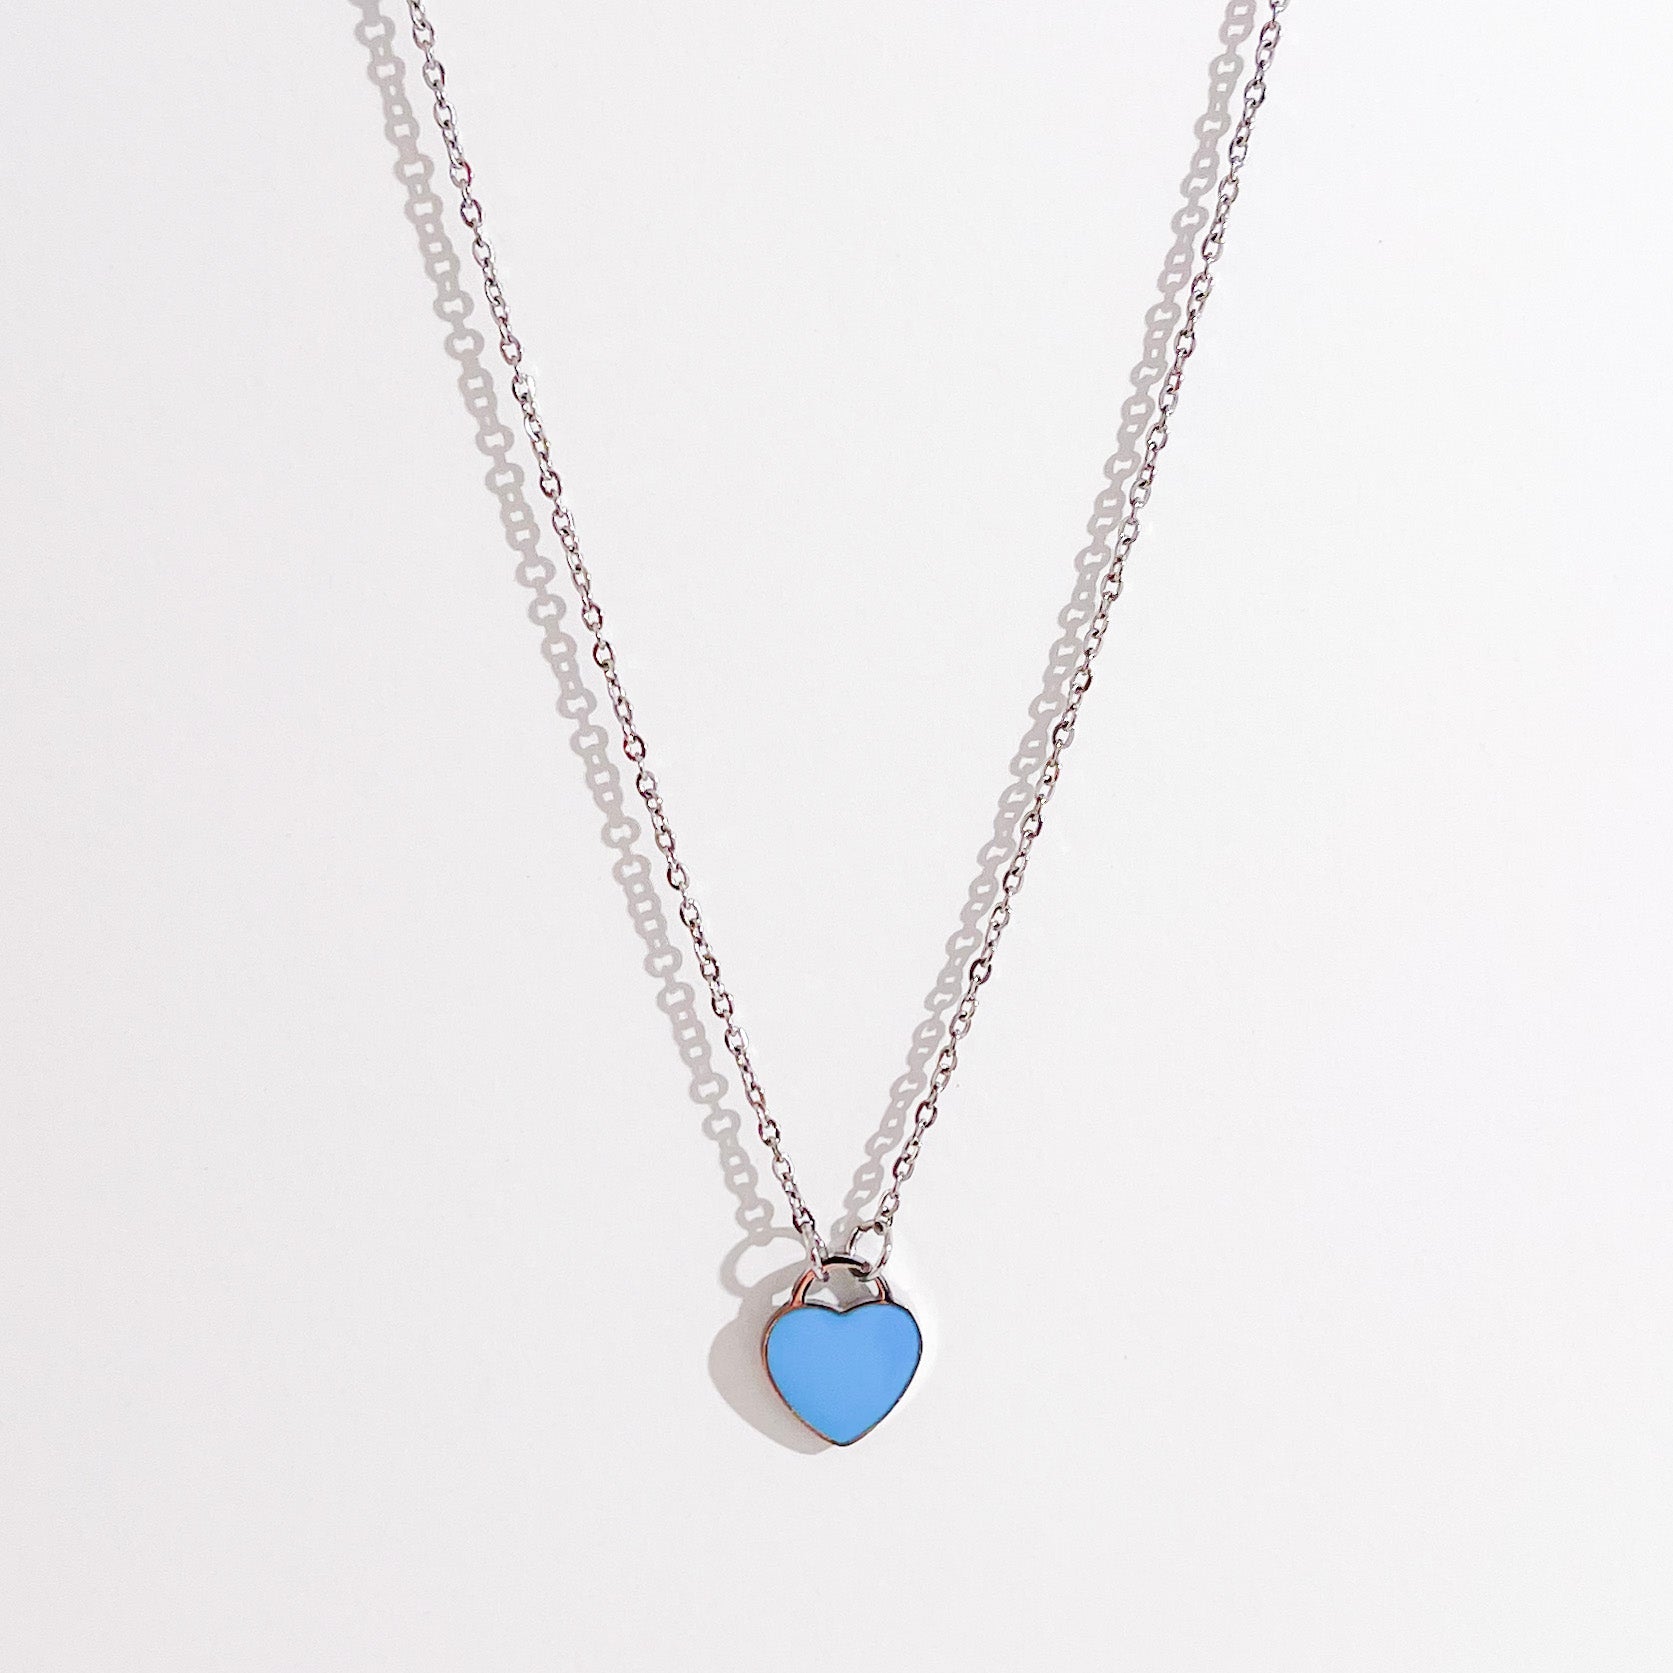 Enamel Heart Necklaces in Silver (Not A Set) - Flaire & Co.